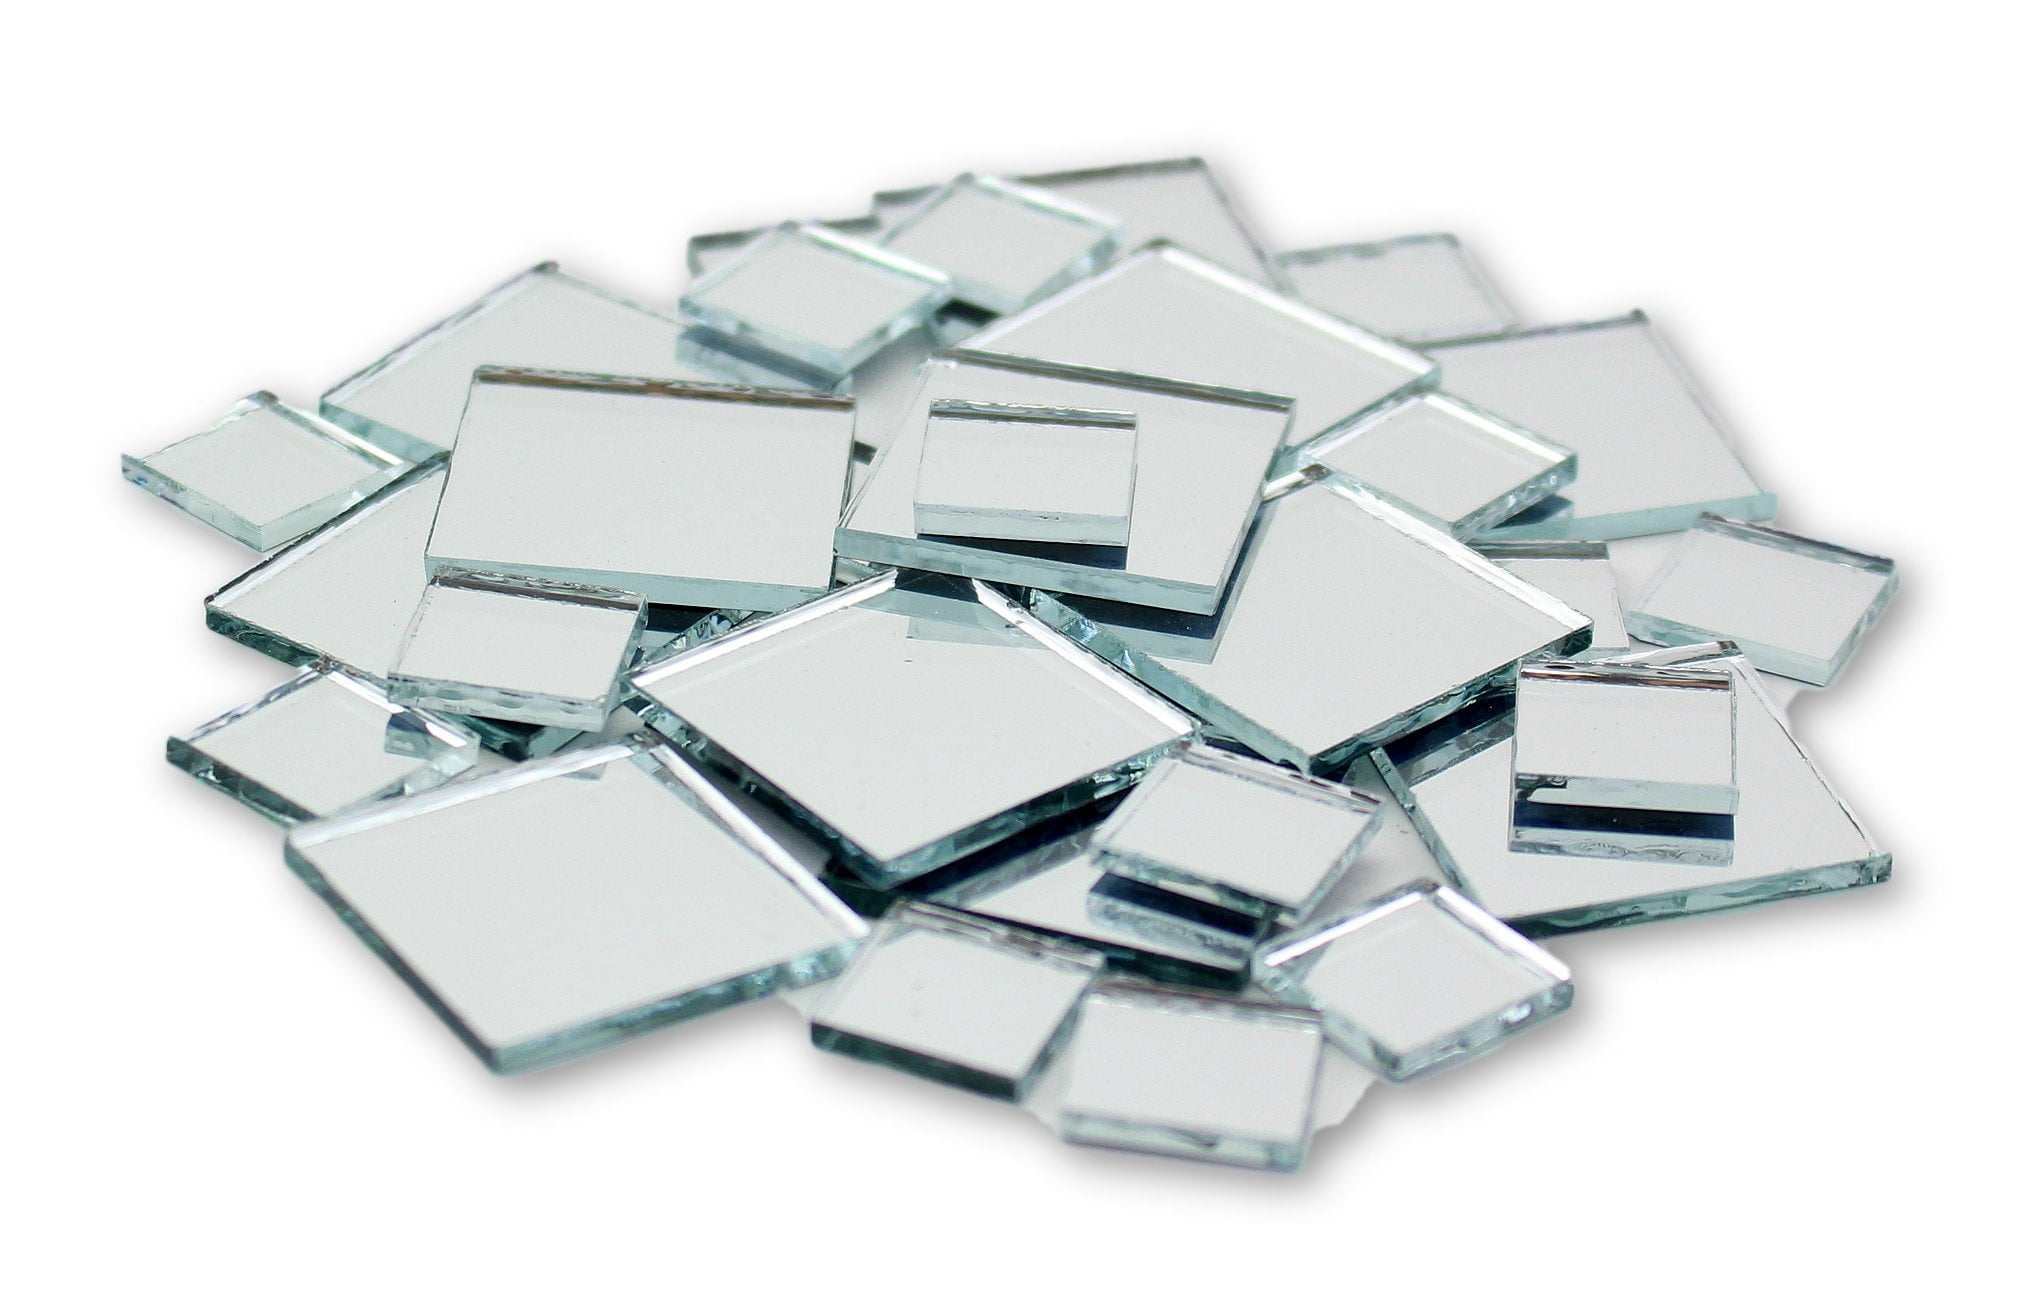 Set of 400 Pcs Small Round Glass Crafts, Real Glass Mirror Mosaic Tiles  (1x1cm)